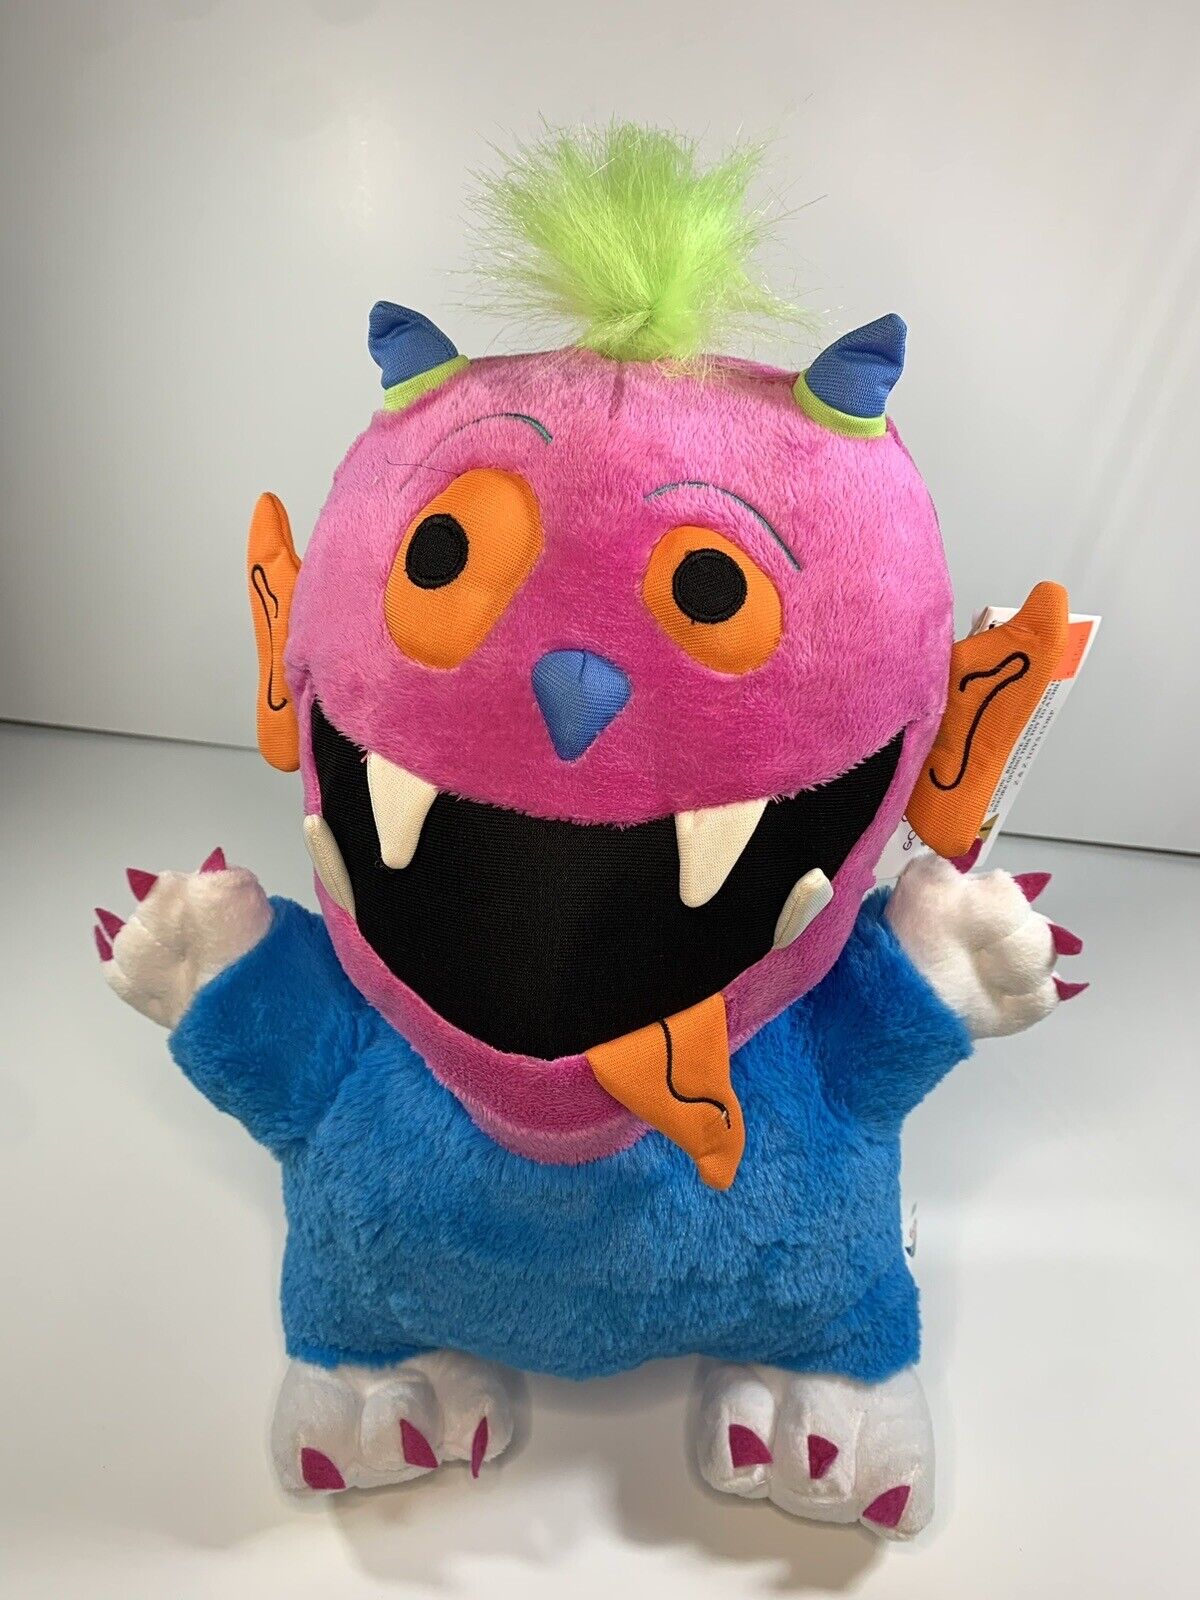 VINTAGE Goofy Grin Monsters Plush Stuffed Monster Irmi - NEW WITH TAGS